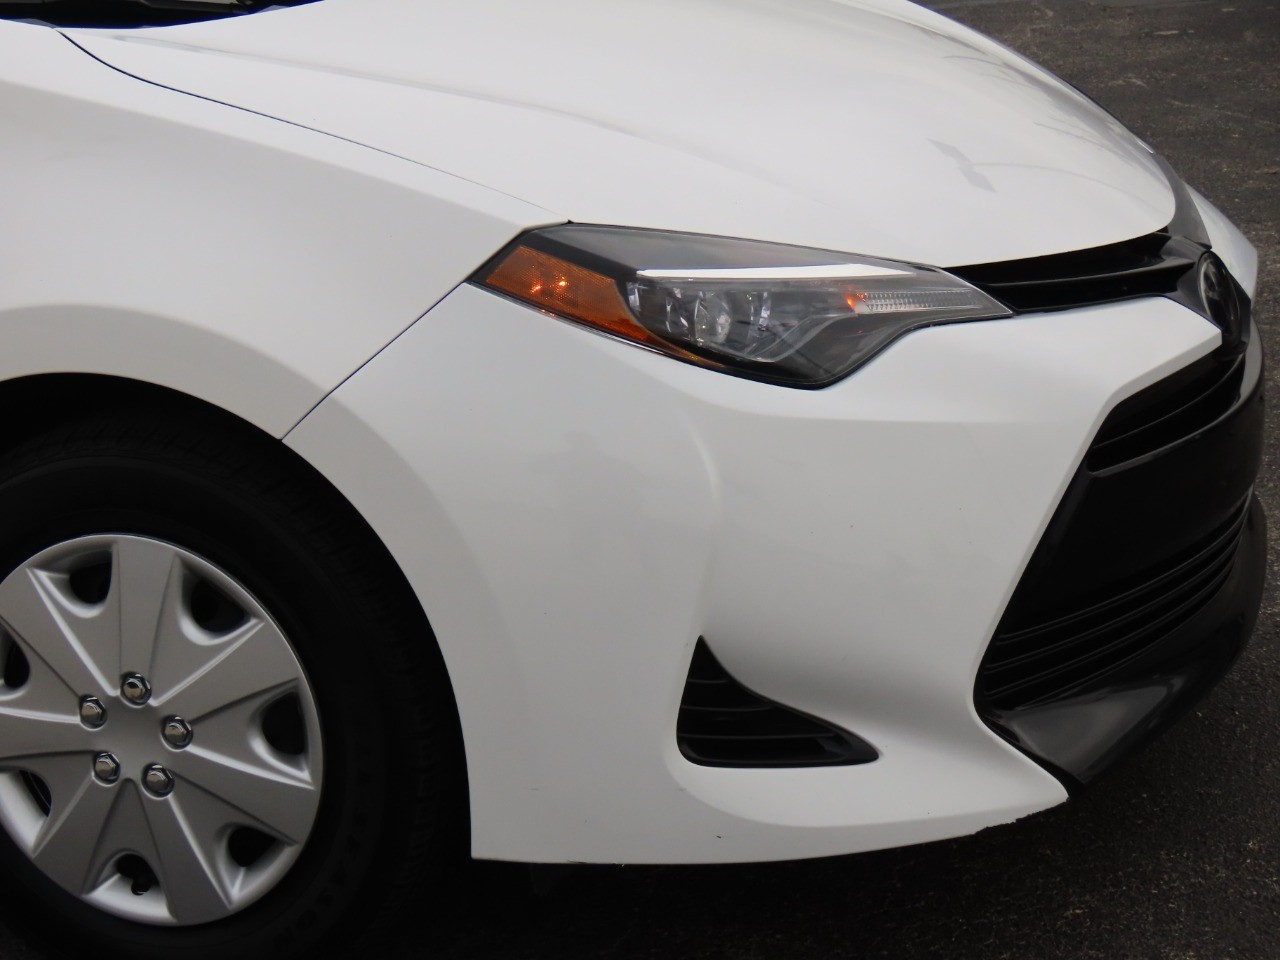 used 2018 Toyota Corolla car, priced at $17,999